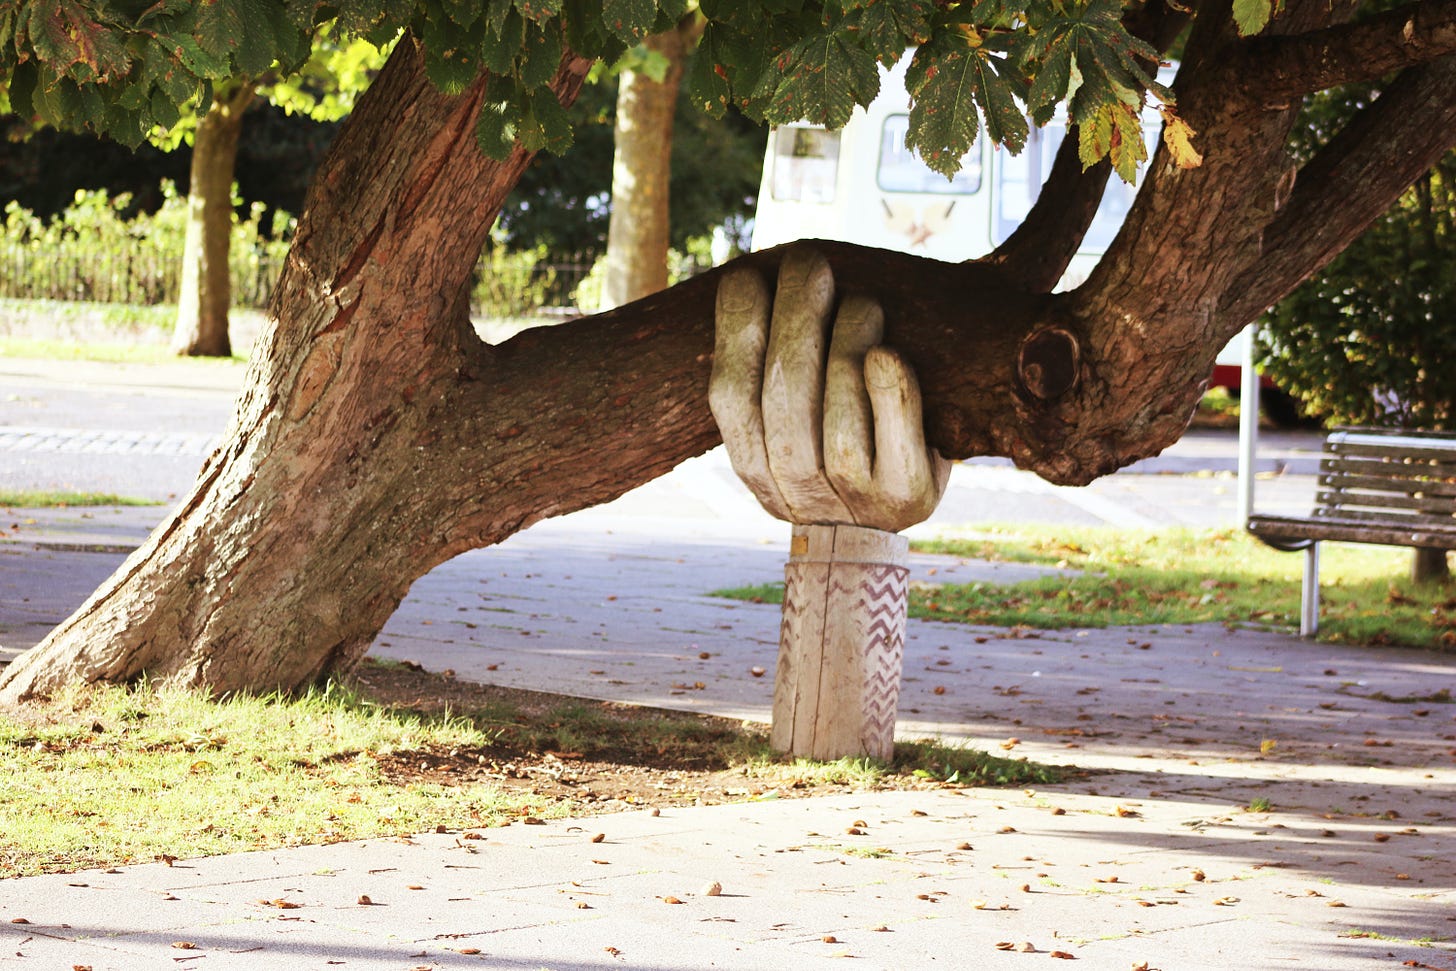 A stone hand with five fingers holding up a leaning tree